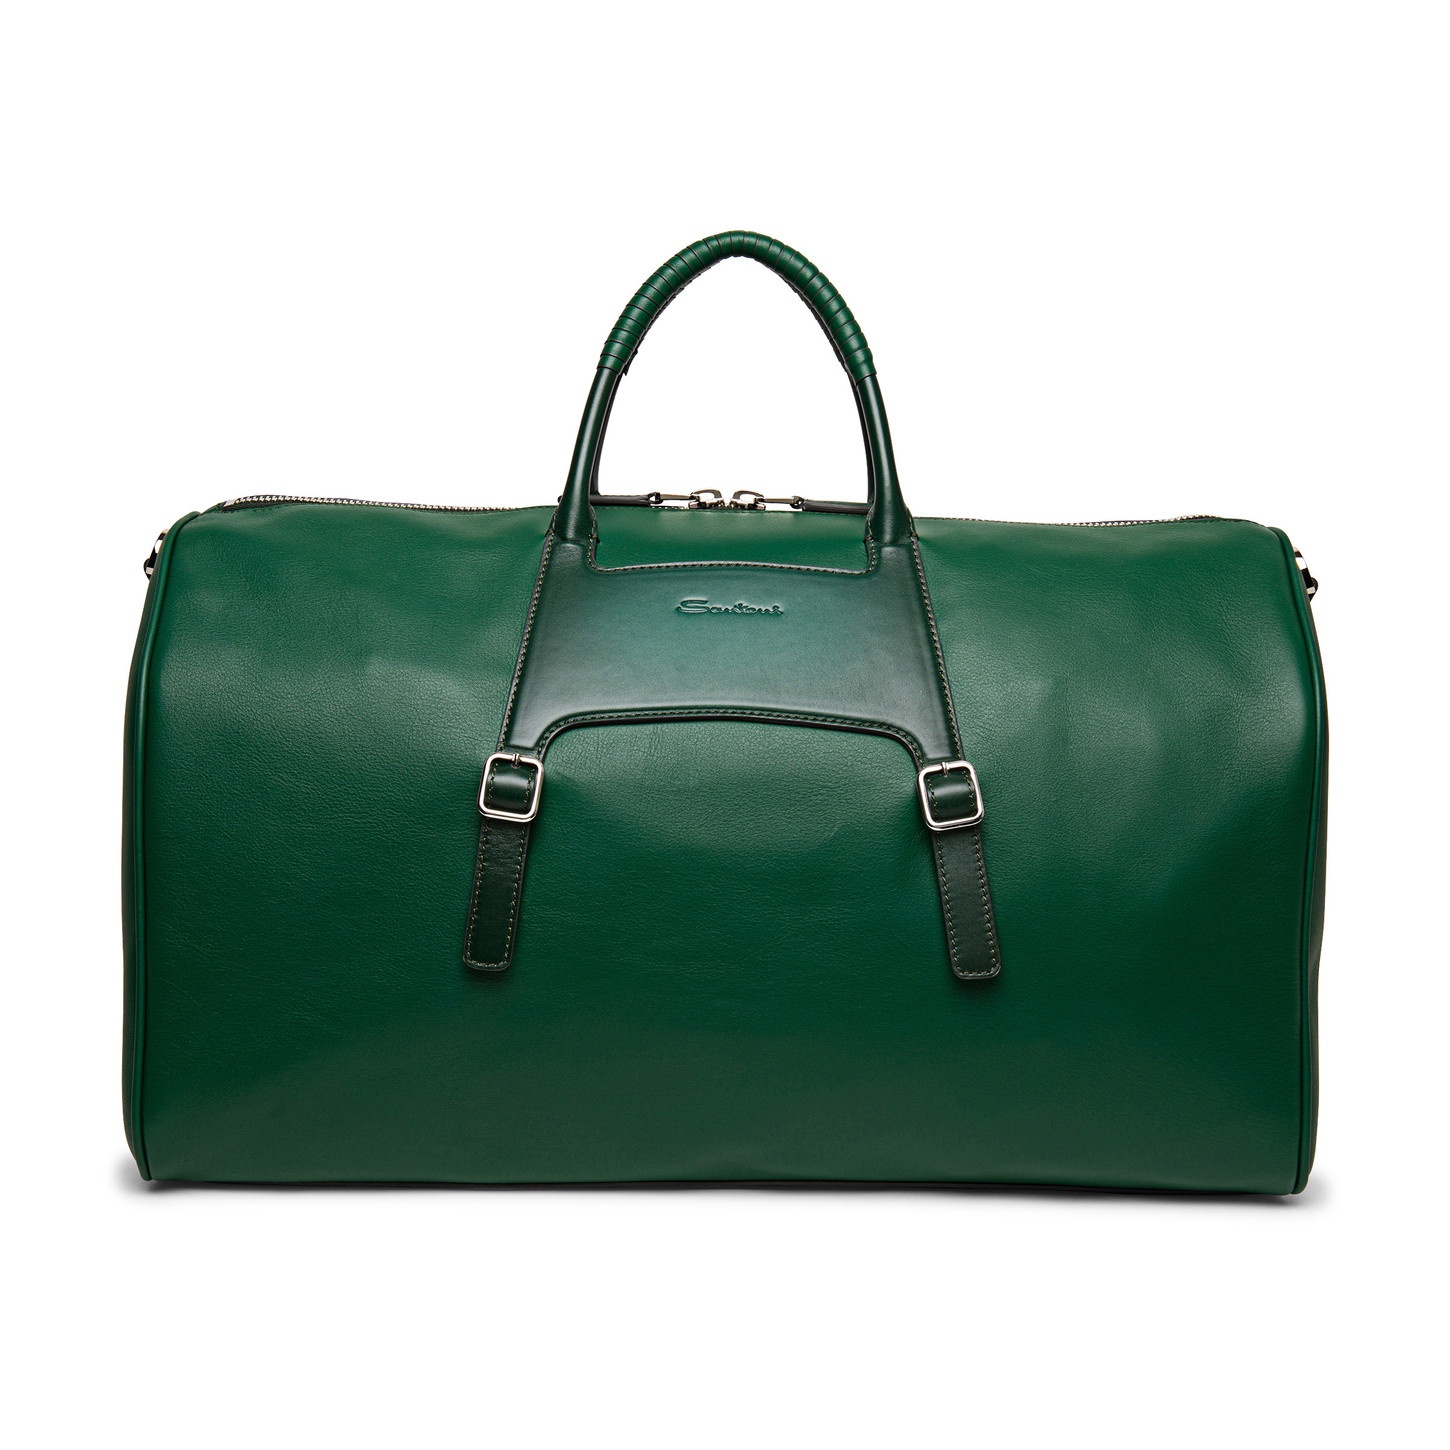 Green leather weekend bag - 1